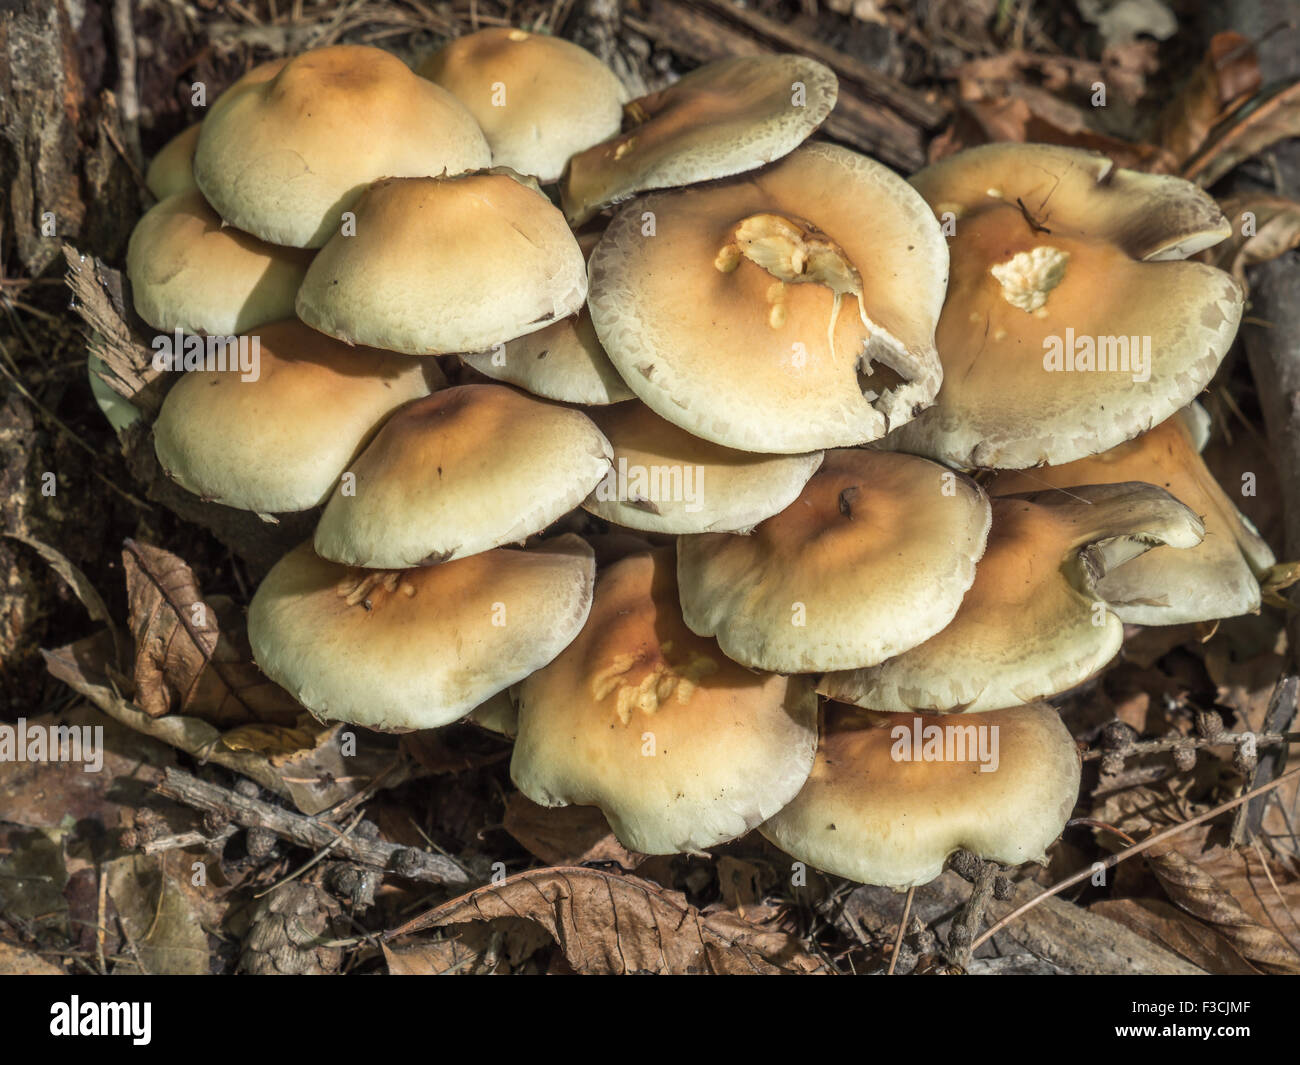 Claster of non-edible fungi growing in the forest Stock Photo